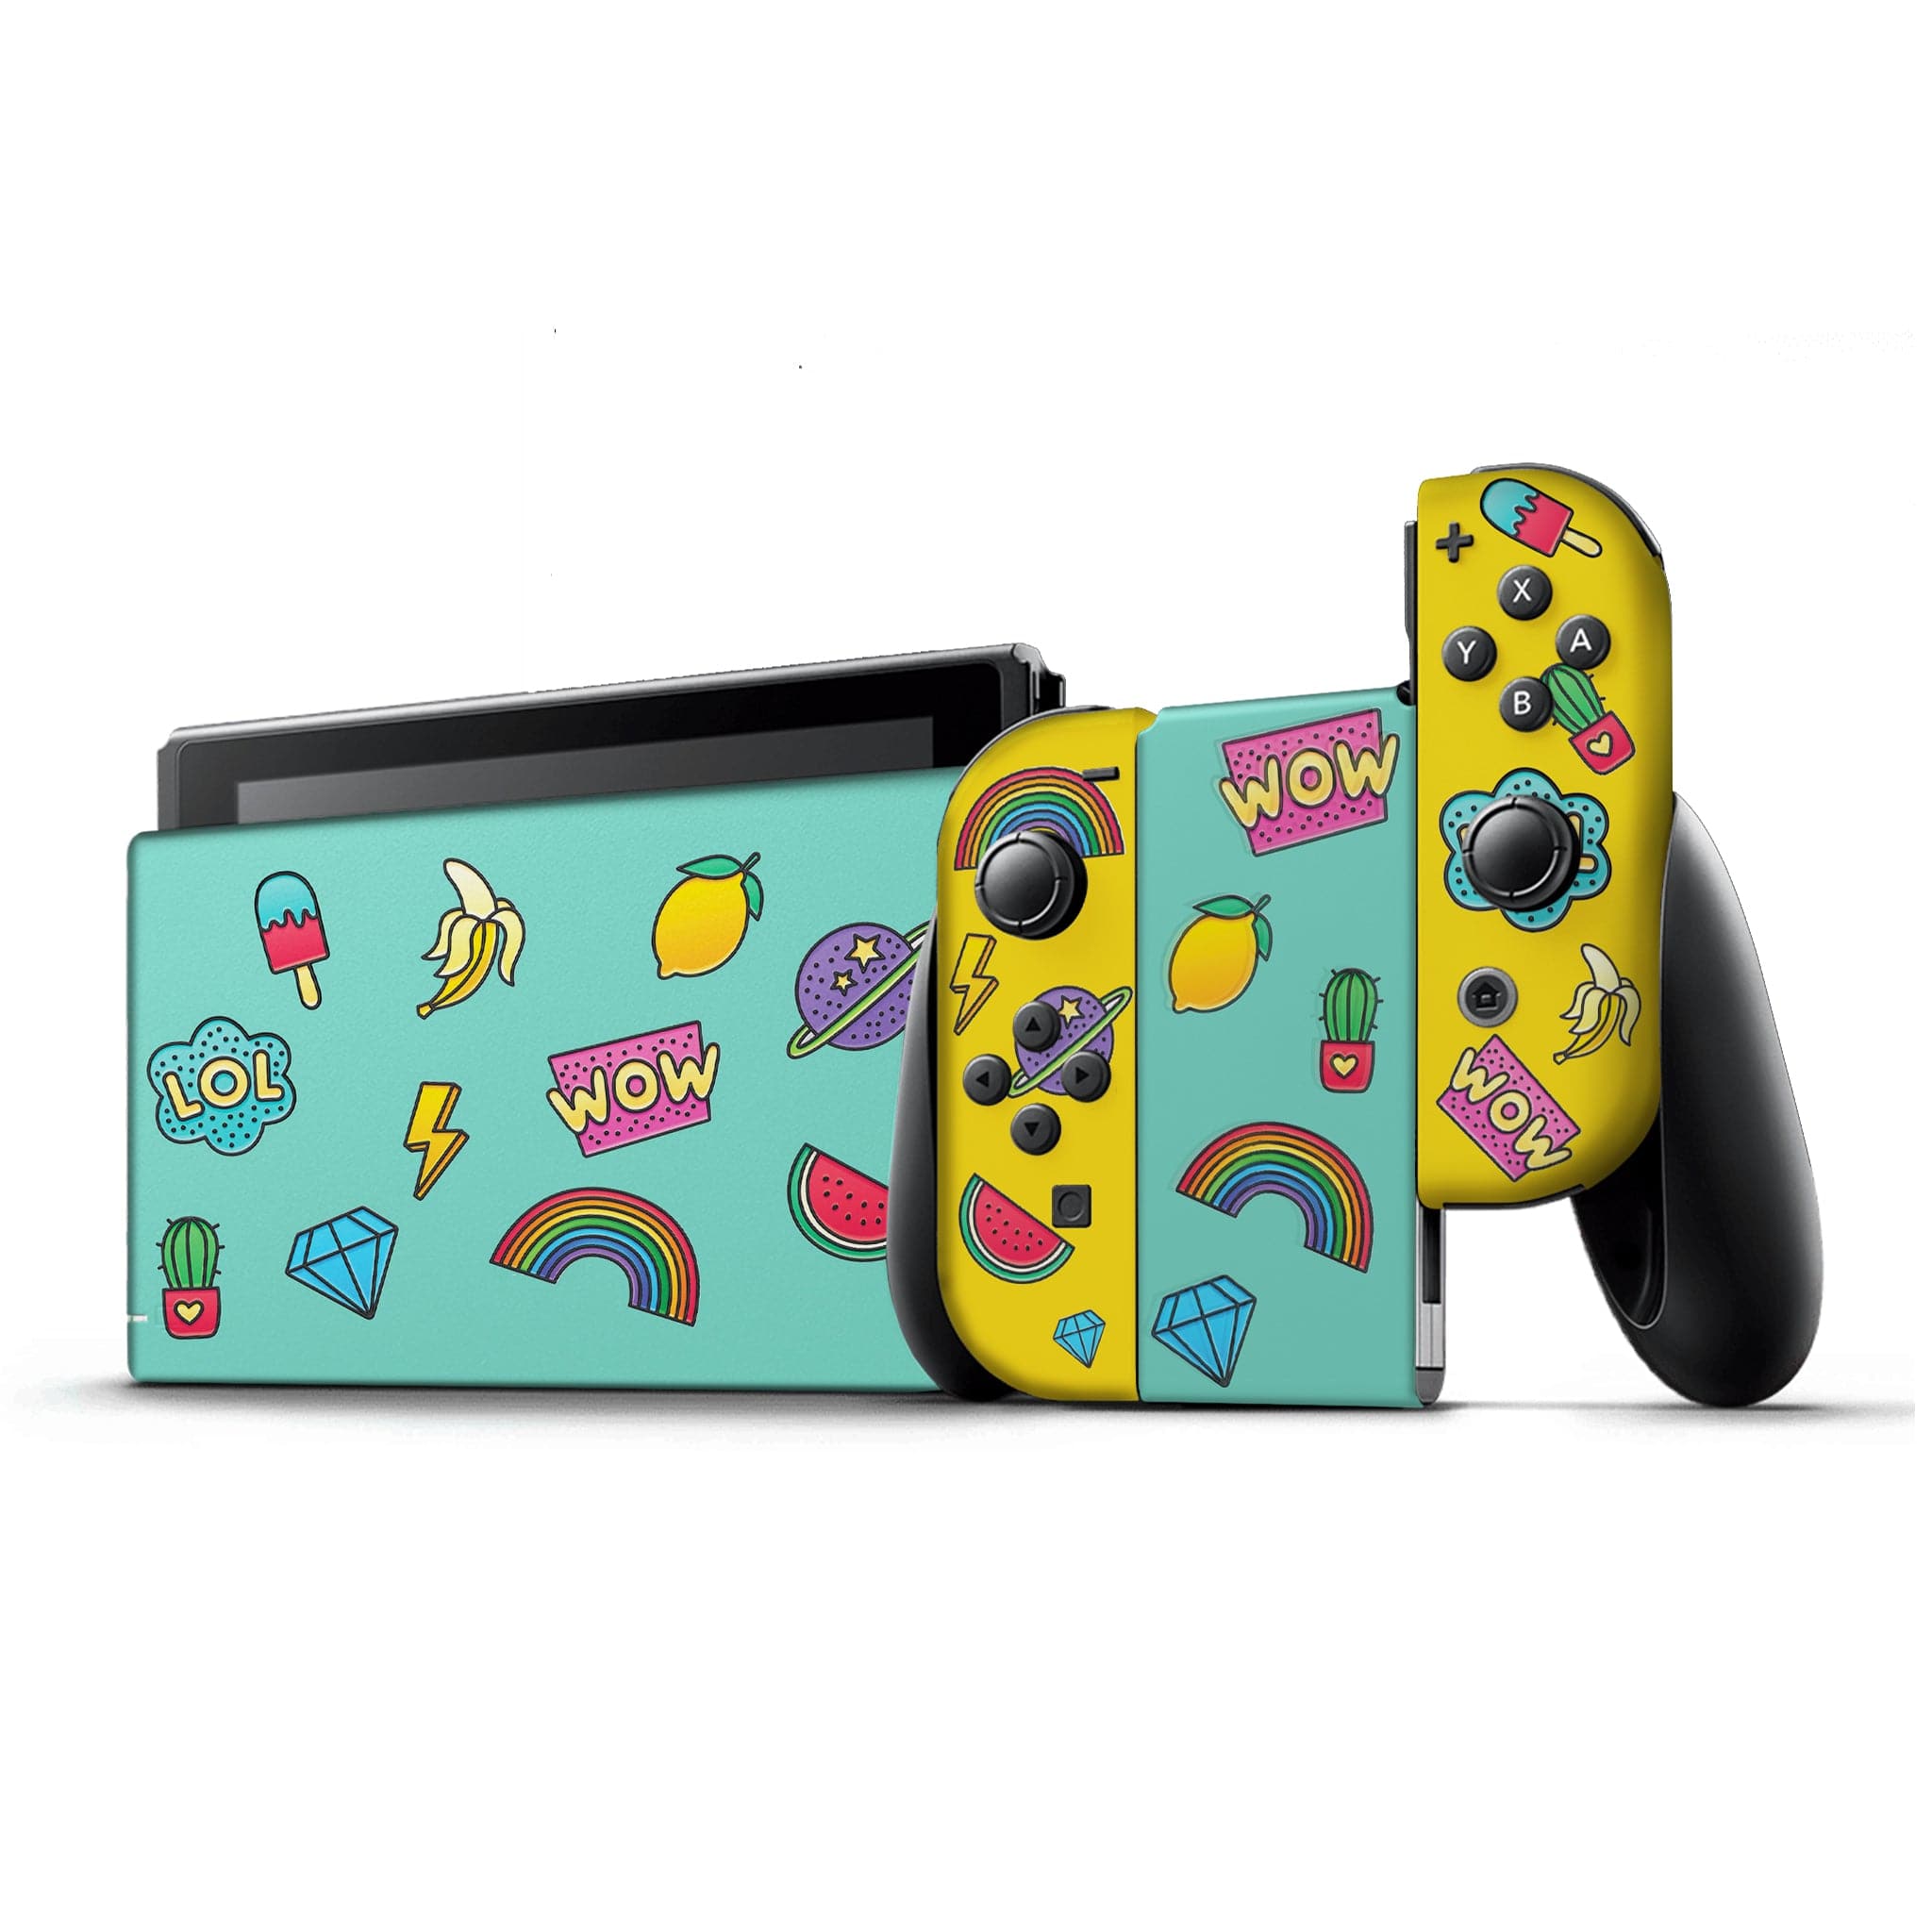 Stickers inspired Nintendo Switch Console Full Set